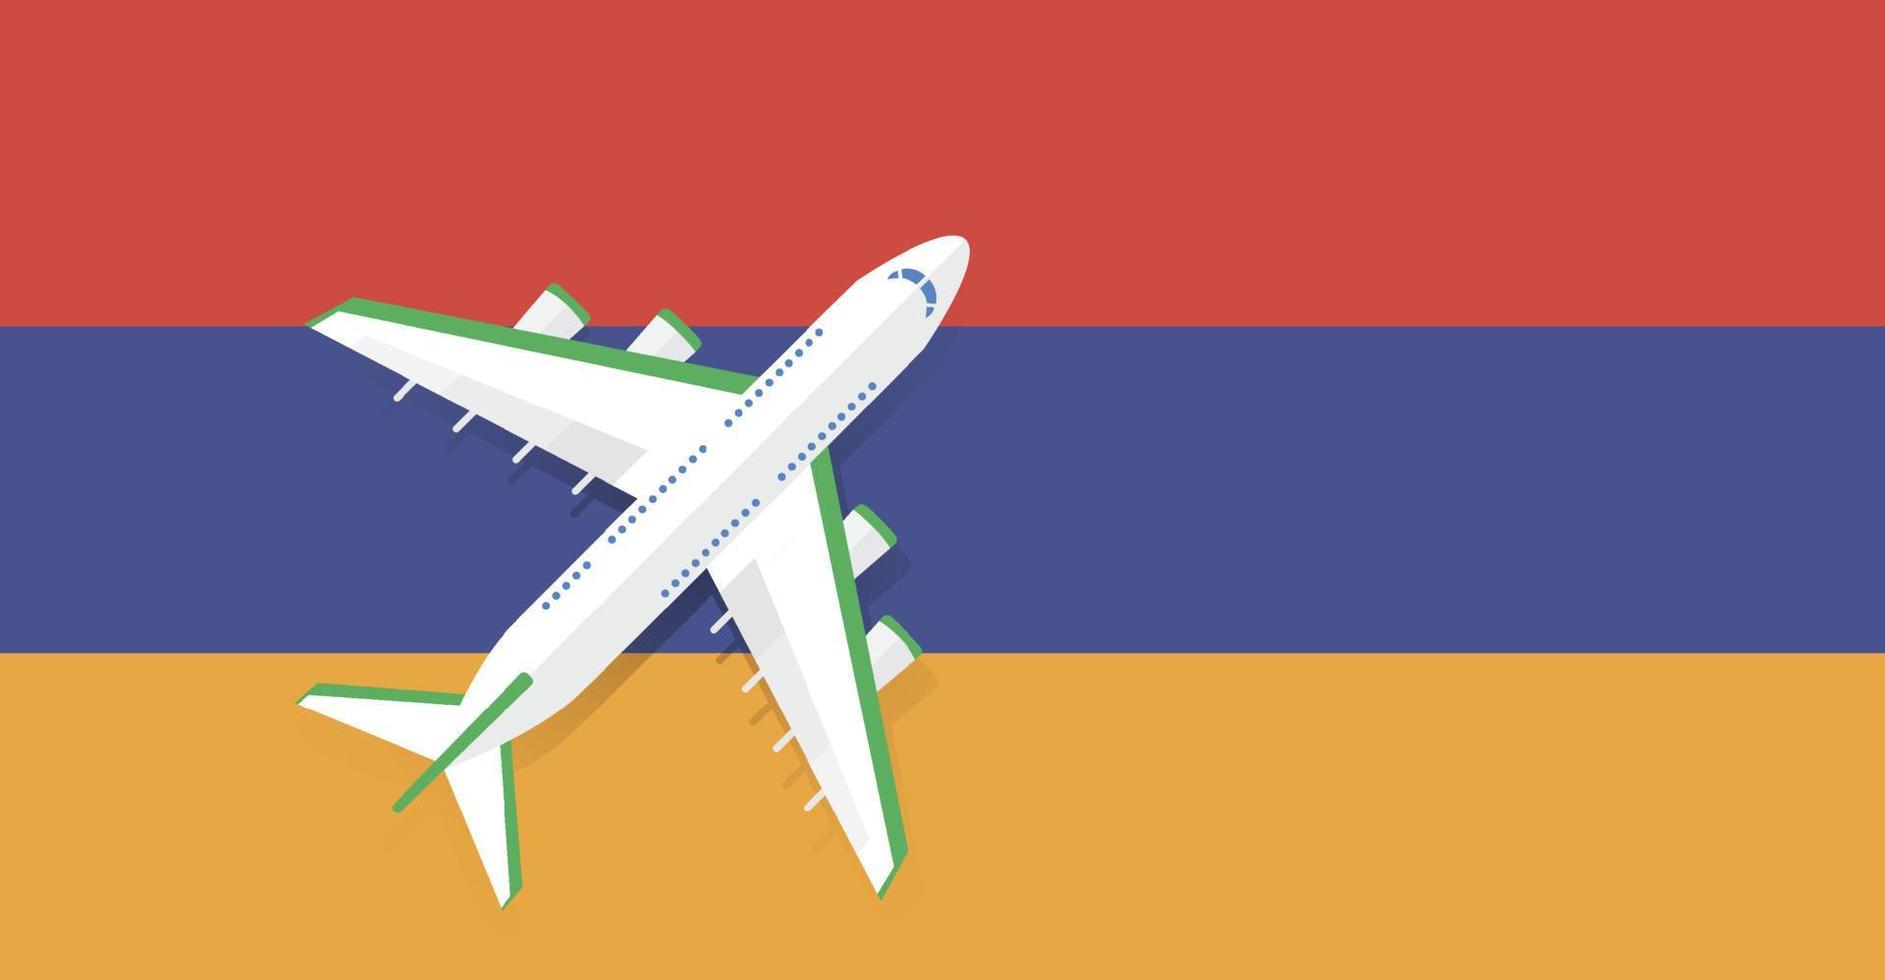 Vector Illustration of a passenger plane flying over the flag of Armenia. Concept of tourism and travel